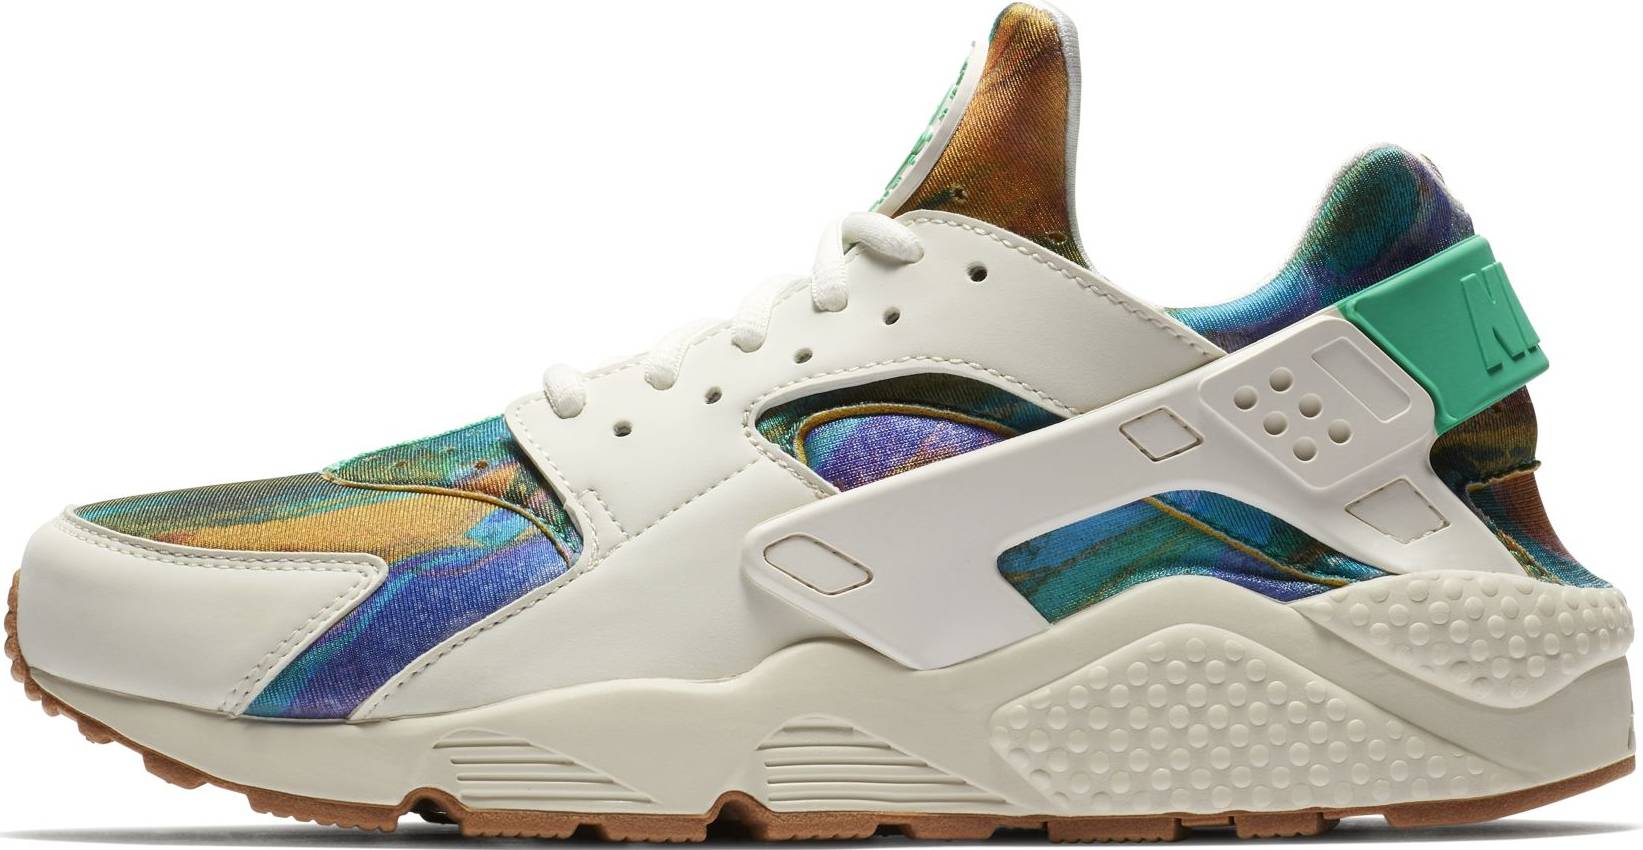 huaraches all colors - Online Discount Shop for Electronics